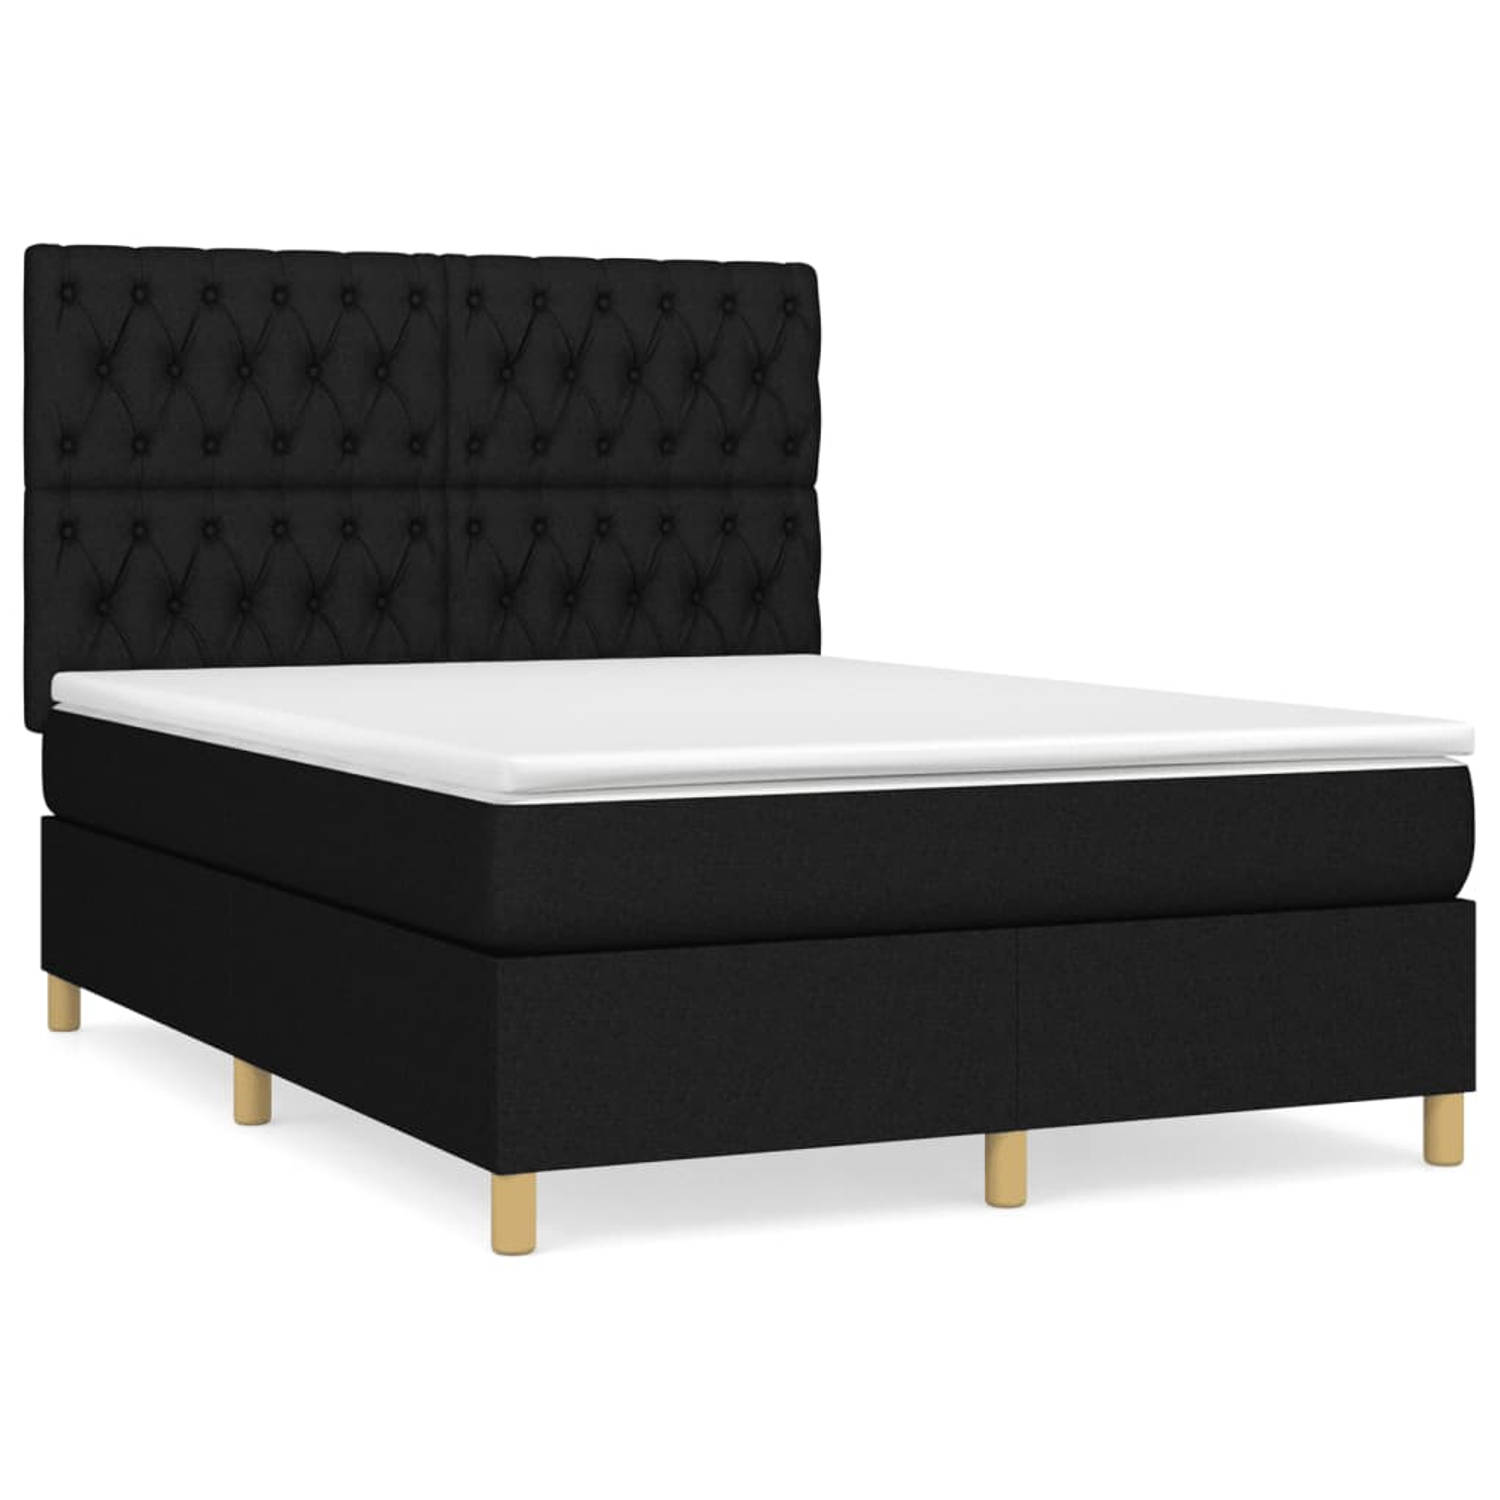 The Living Store Boxspringbed - Comfort - Bed - 203x144x118/128 cm - Zwart